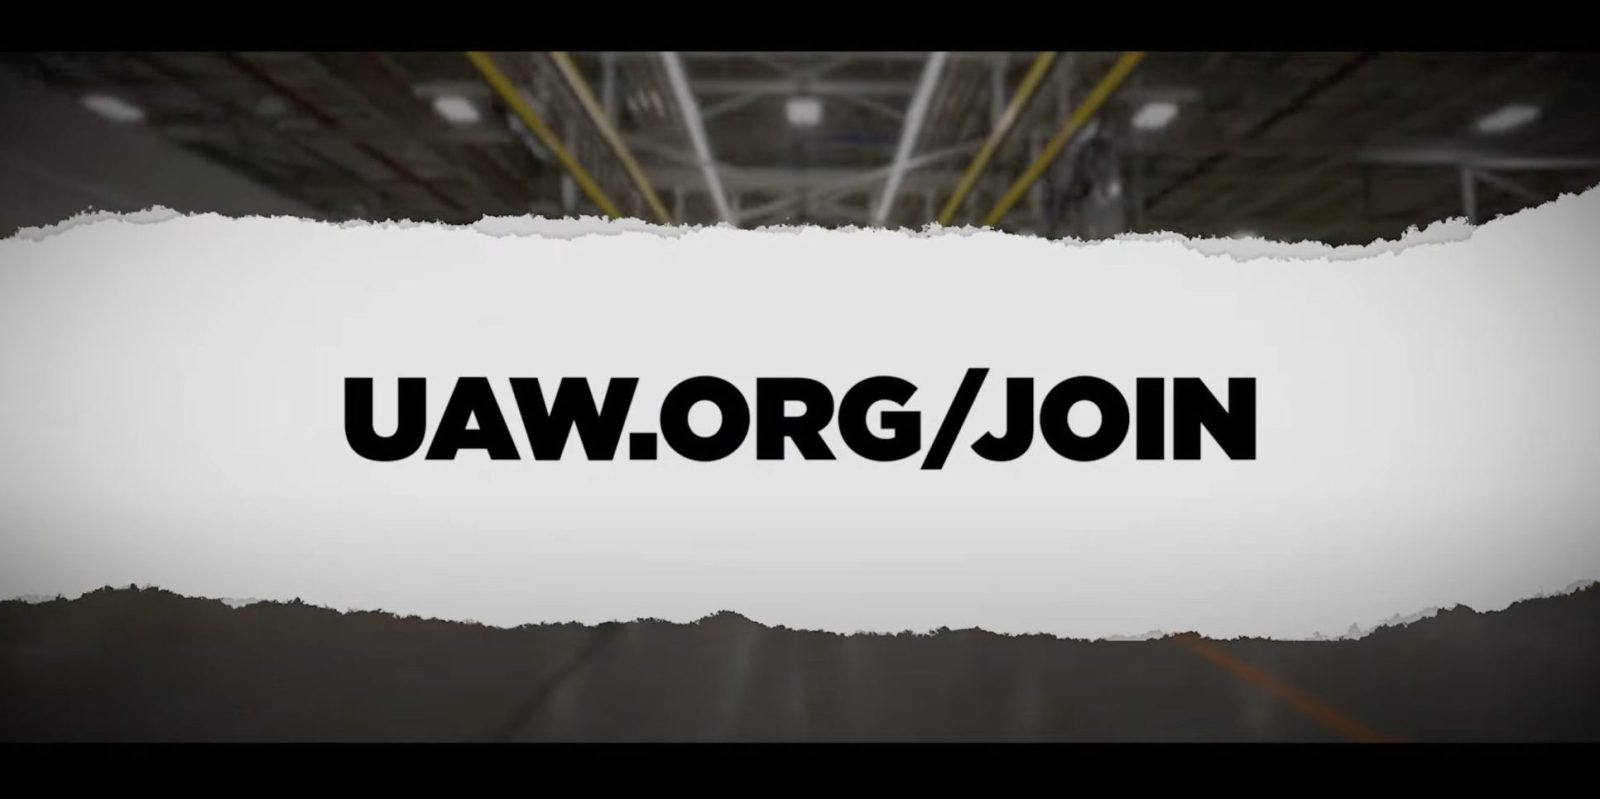 uaw launches campaign to unionize all automakers at once – tesla, toyota, etc